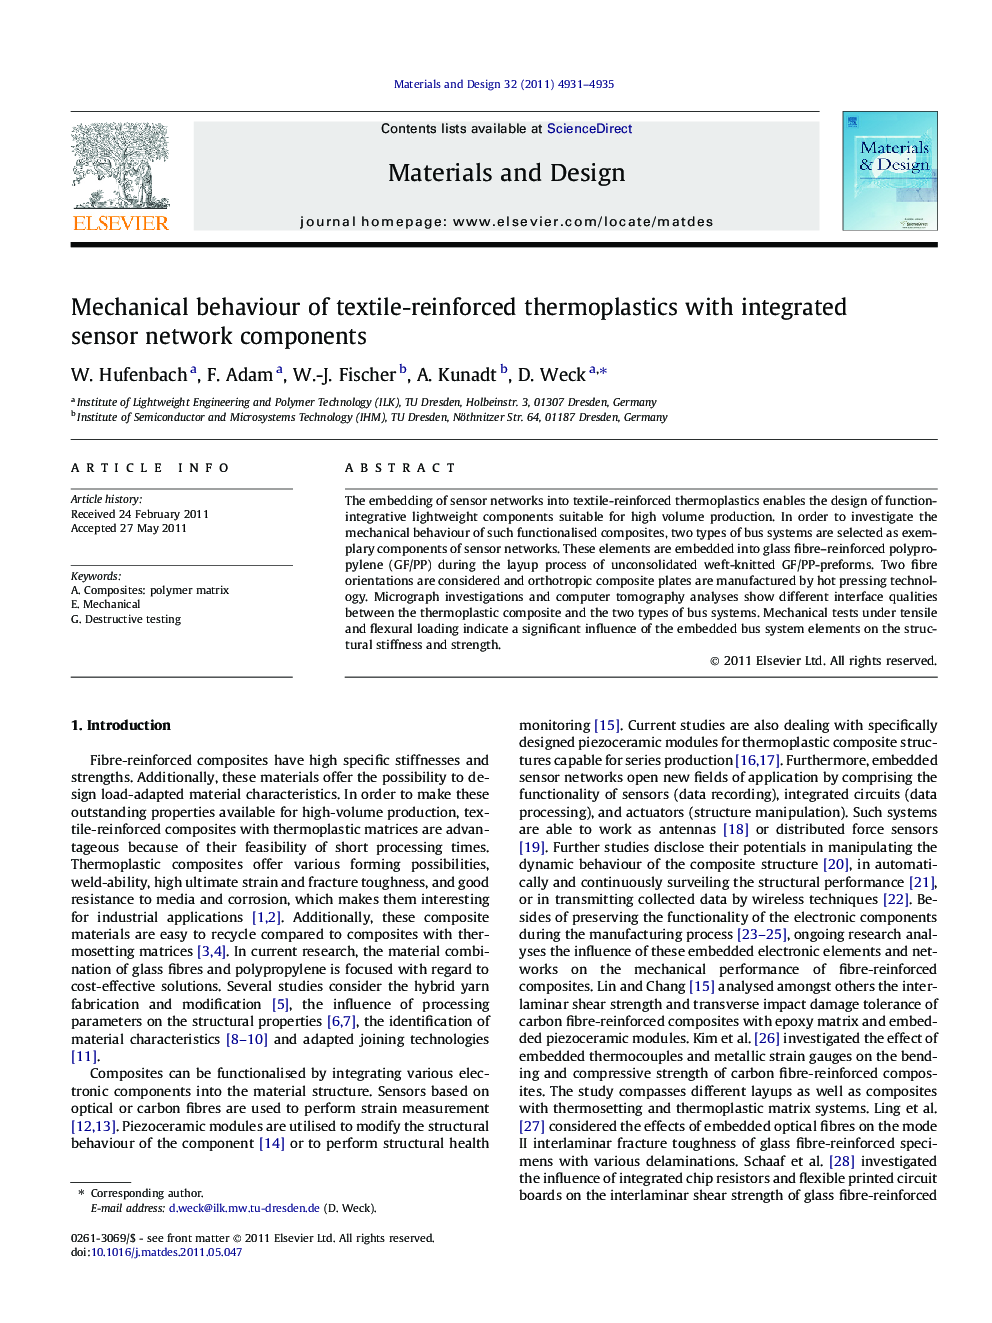 Mechanical behaviour of textile-reinforced thermoplastics with integrated sensor network components